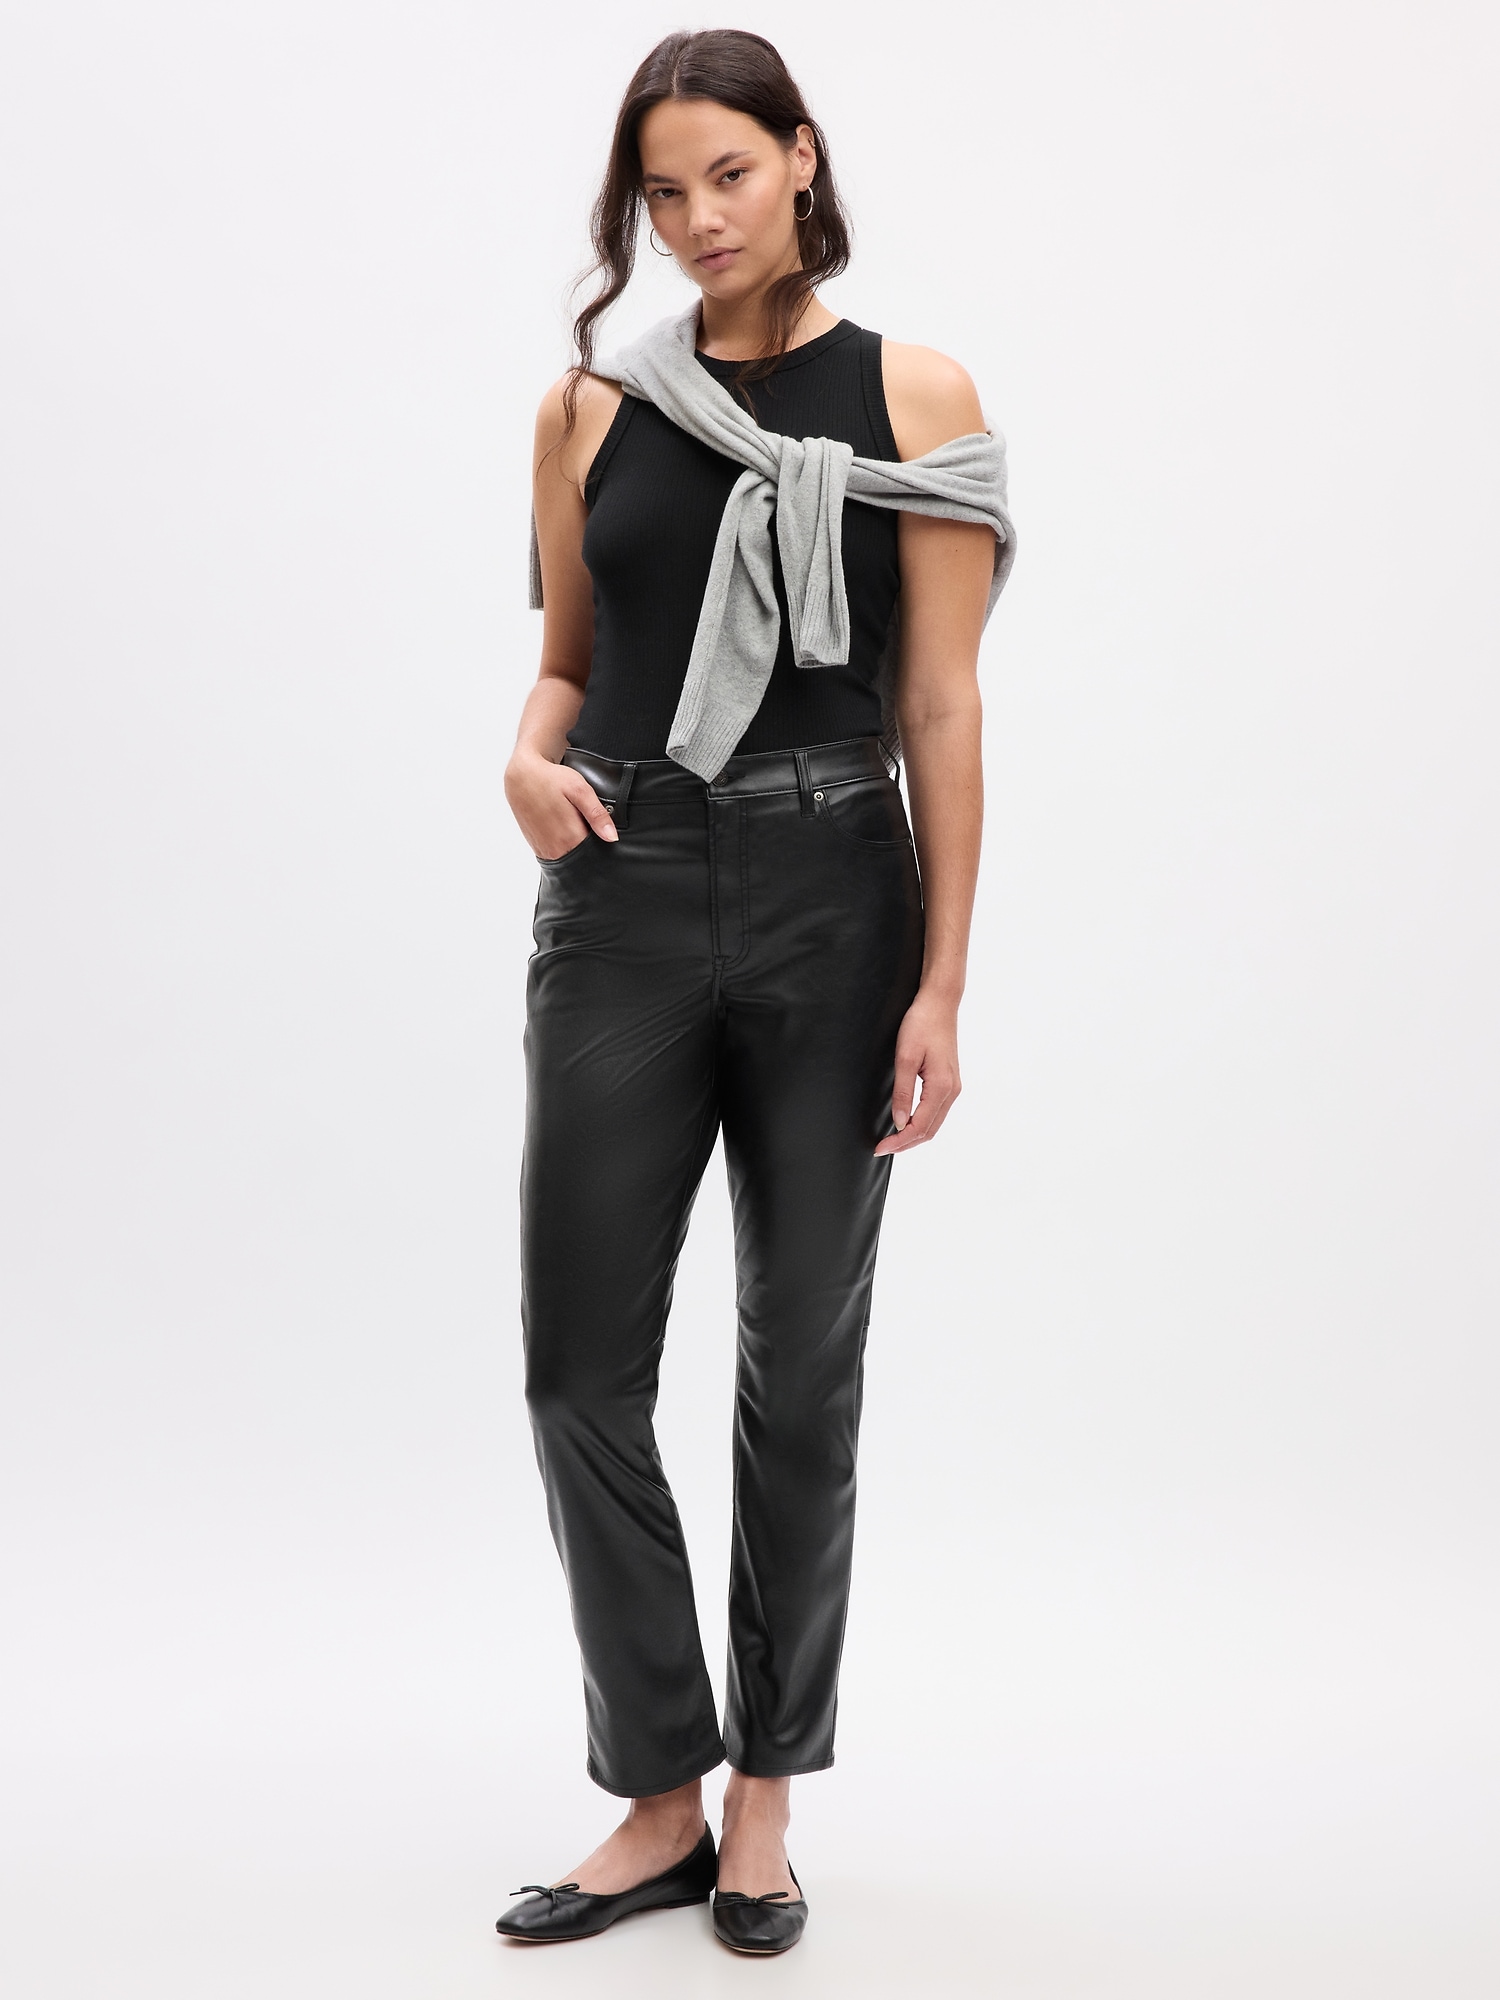 Do these leather pants fit properly? : r/PetiteFashionAdvice